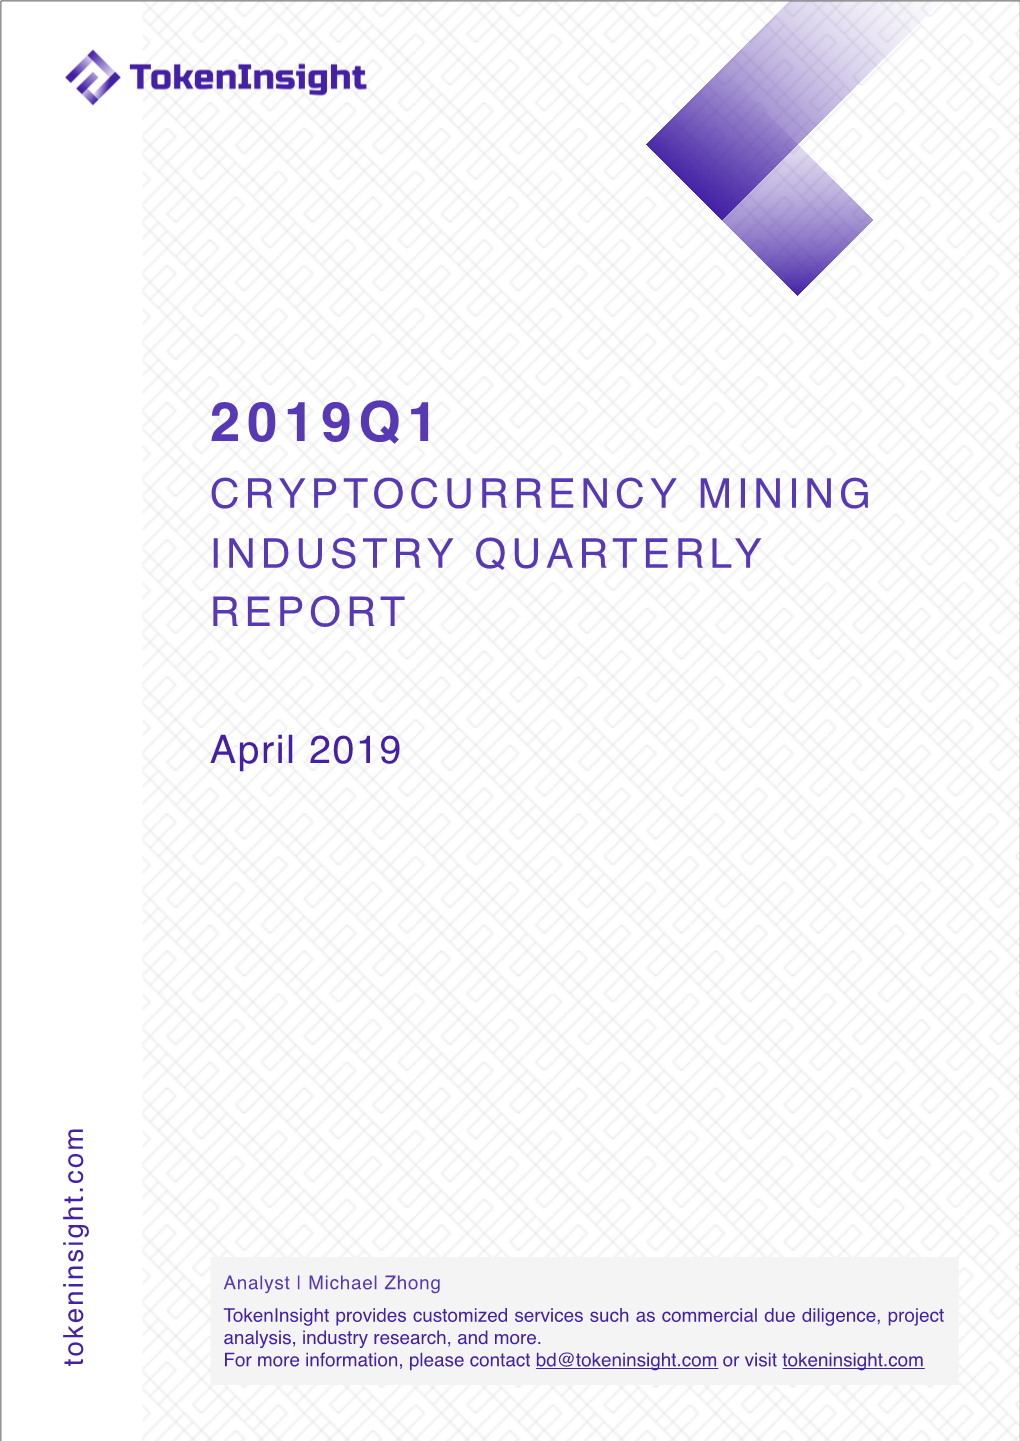 TI-2019Q1 Cryptocurrency Mining Industry Quarterly Report-2019.04.25